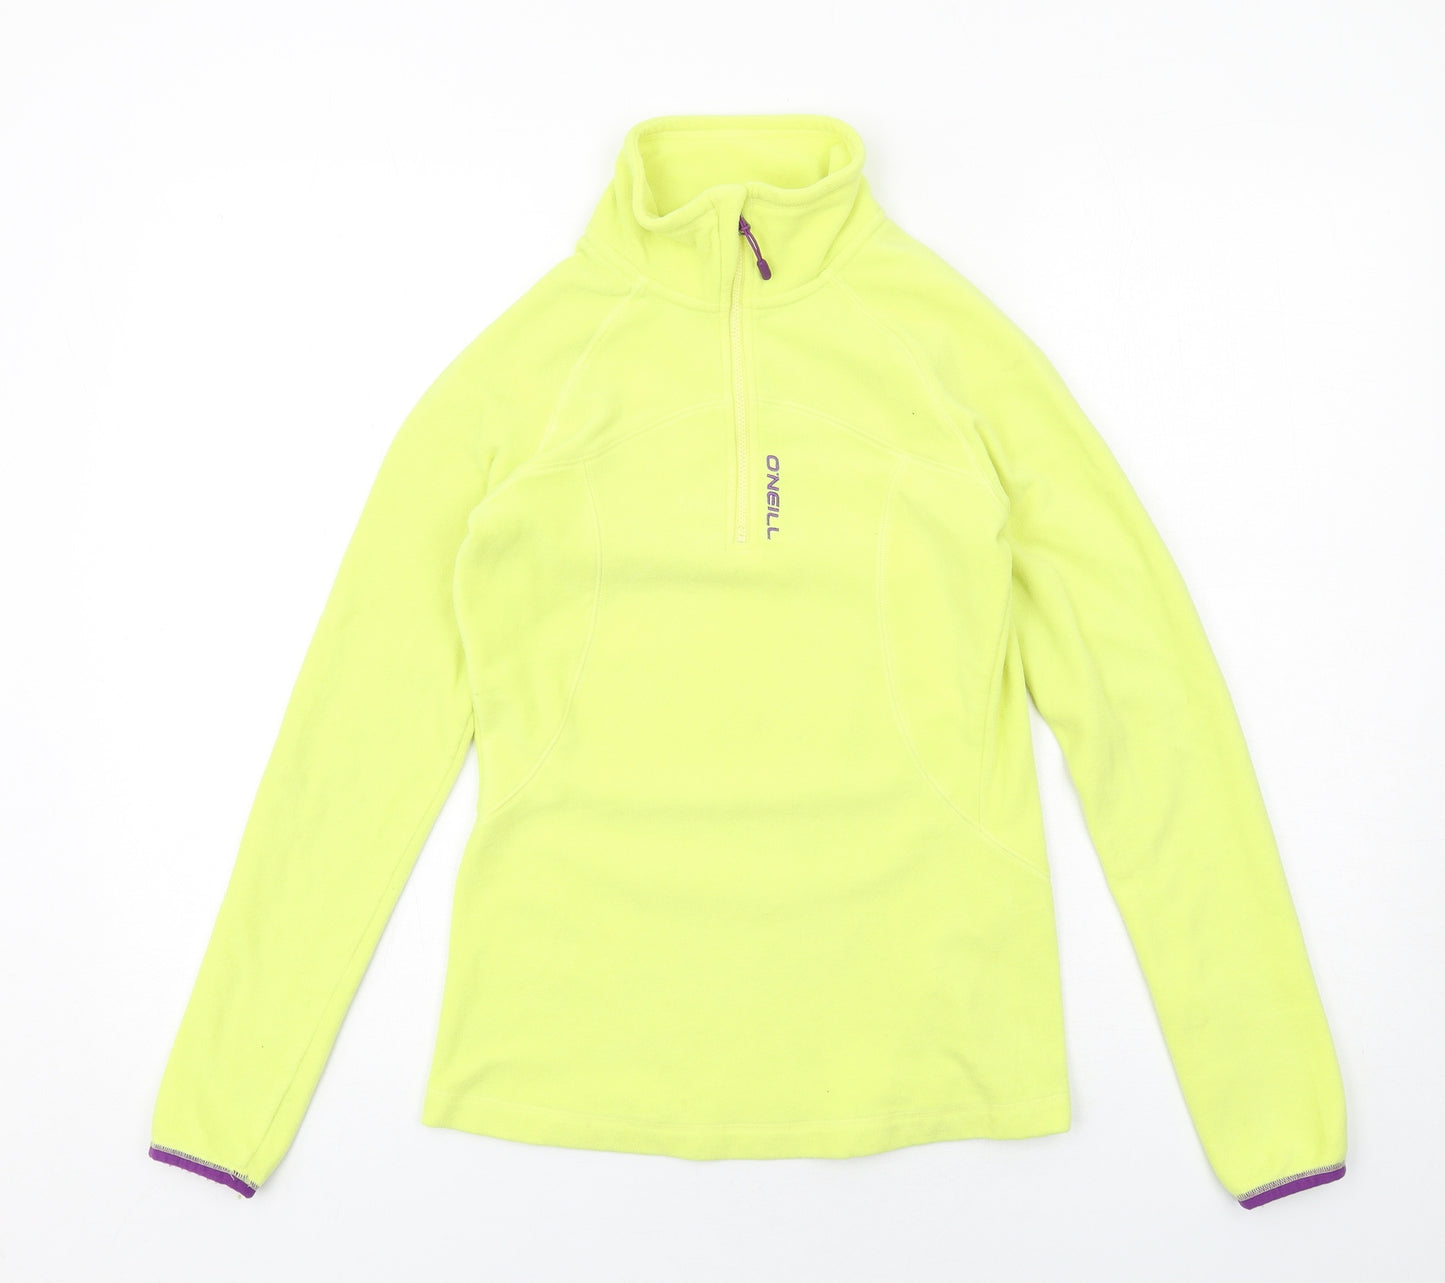 O'Neill Womens Yellow Polyester Pullover Sweatshirt Size S Zip